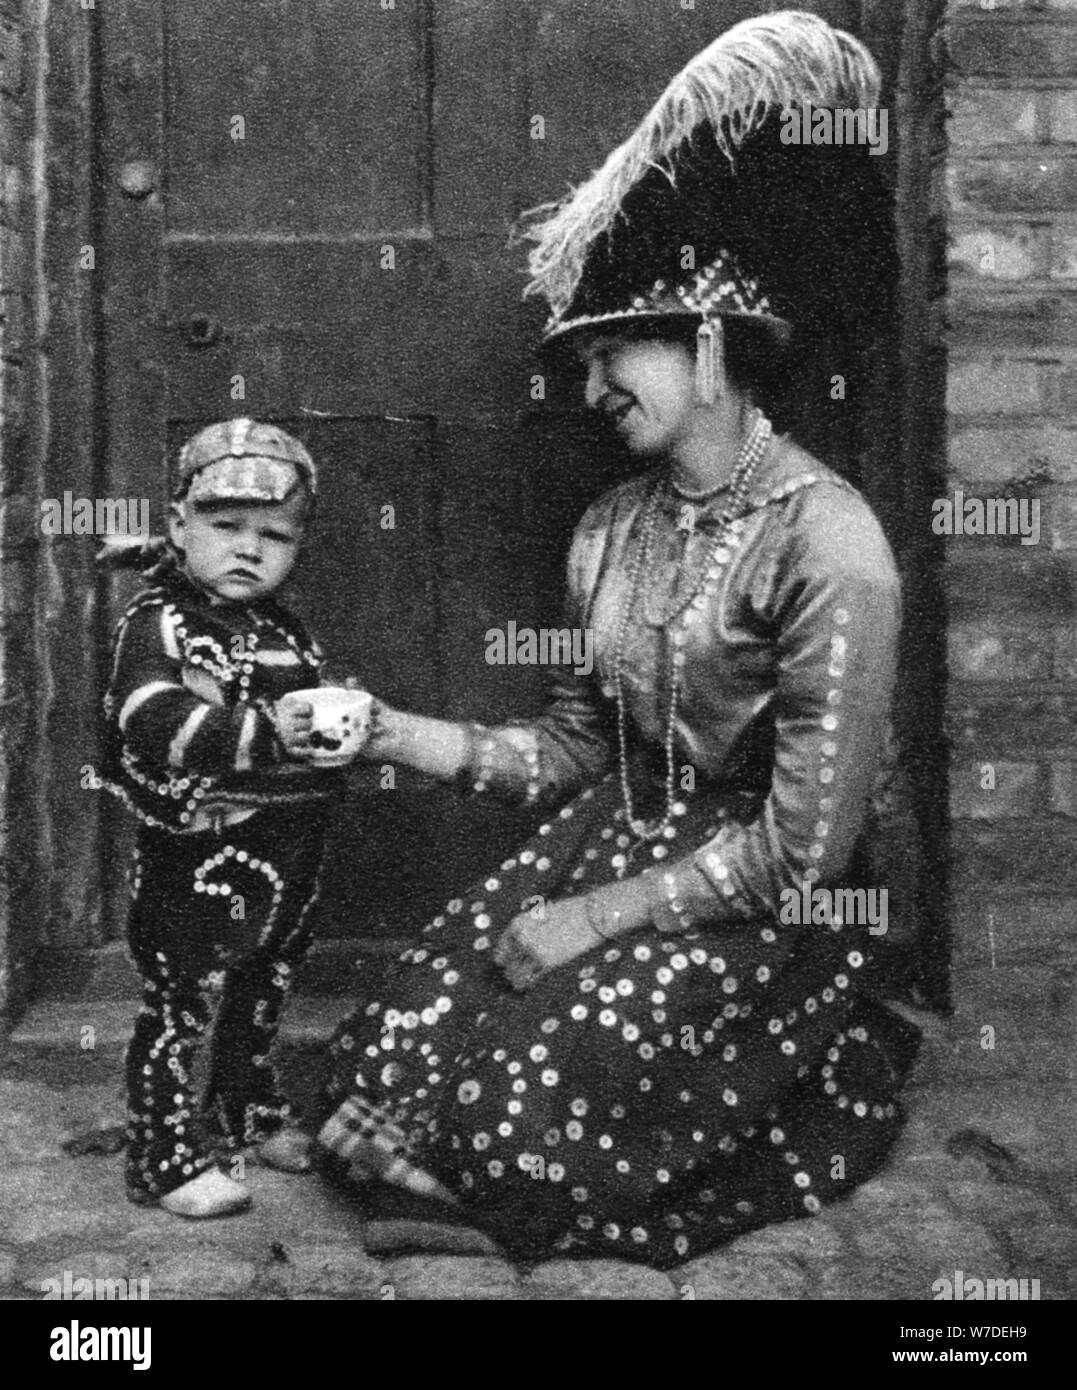 Pearly Pearly Queen und Prince, London, 1926-1927. Artist: Hoppe Stockfoto